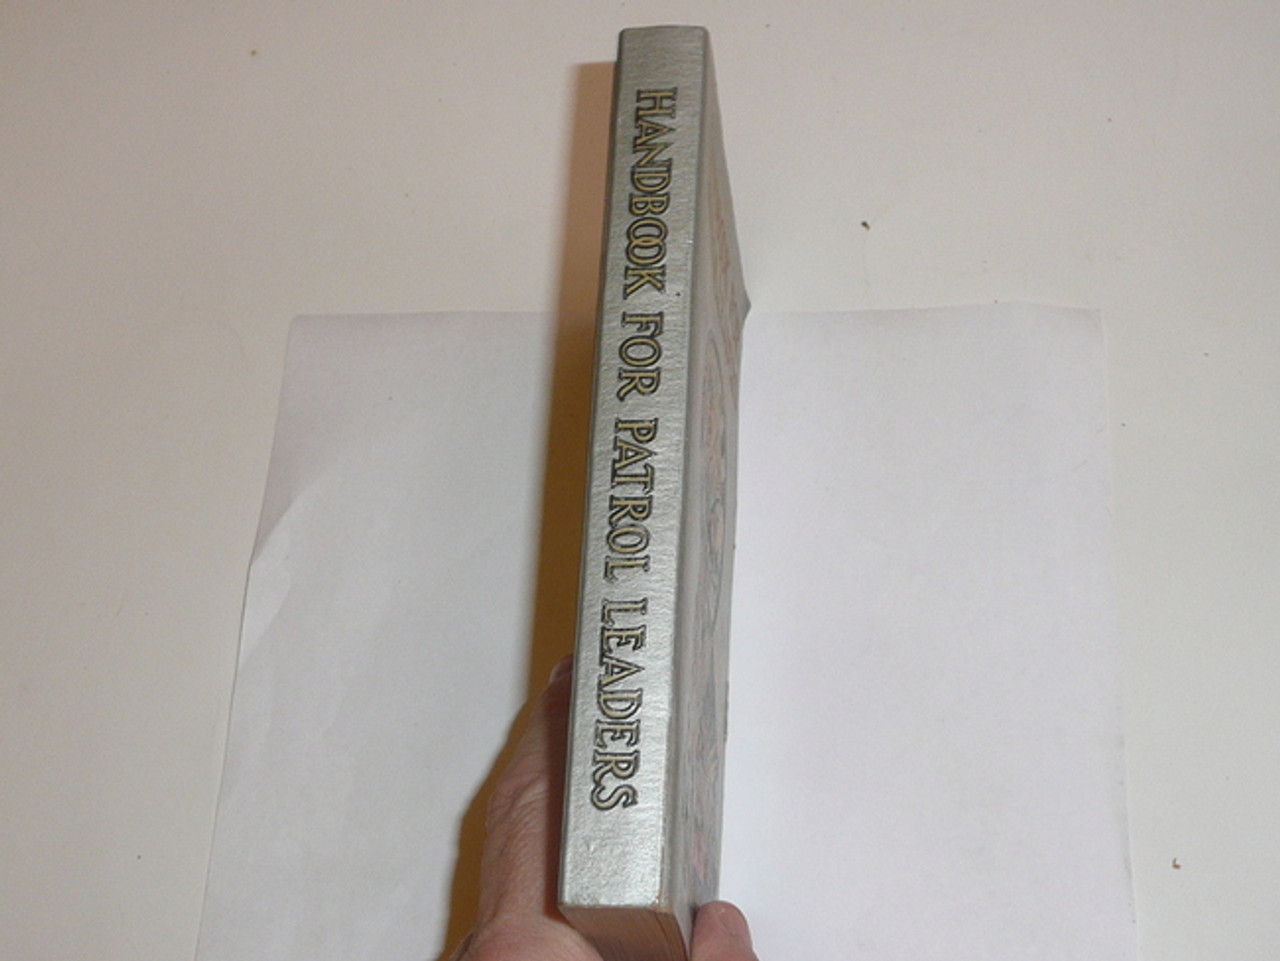 1949 Handbook For Patrol Leaders, First Edition, Eighteenth Printing, MINT Condition